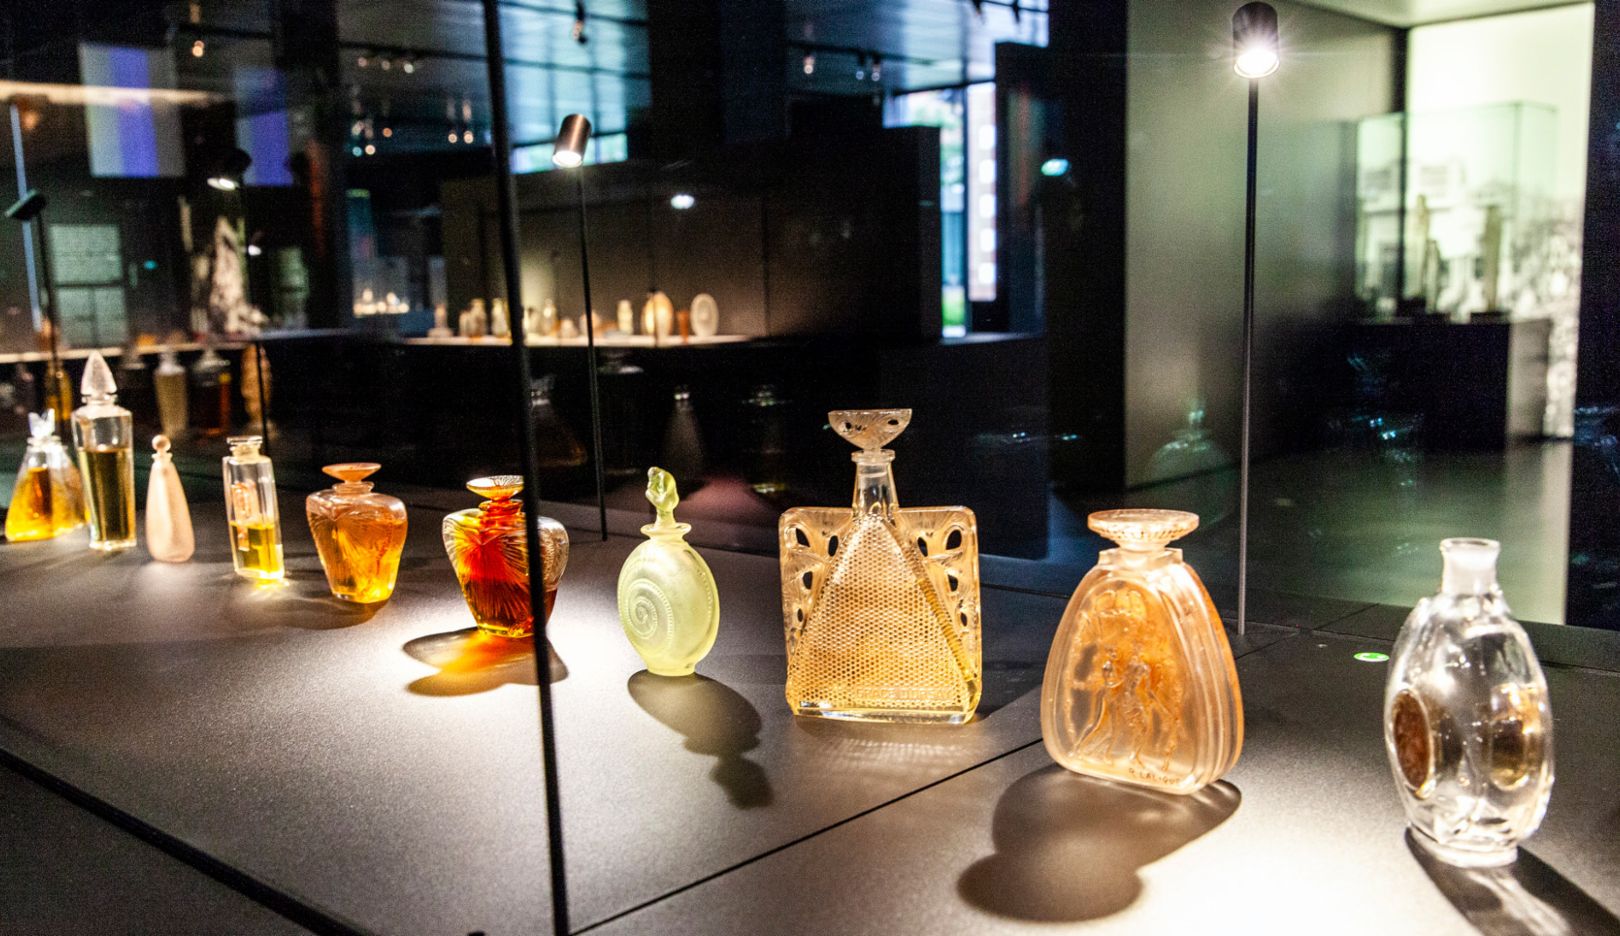 A view into this display case at the Musée Lalique in Wingen-sur-Moder. On the left, D'où vient-il from 1920, made for Vigny. Next to them are two prototypes from 1919. The fourth flacon was made for D'Héraud in 1914; the fifth and sixth bottles show butterfly metamorphoses. These are followed by the two models Le Succès and Grâce, made for D'Orsay, as well as L'Idylle and a prototype from 1910.